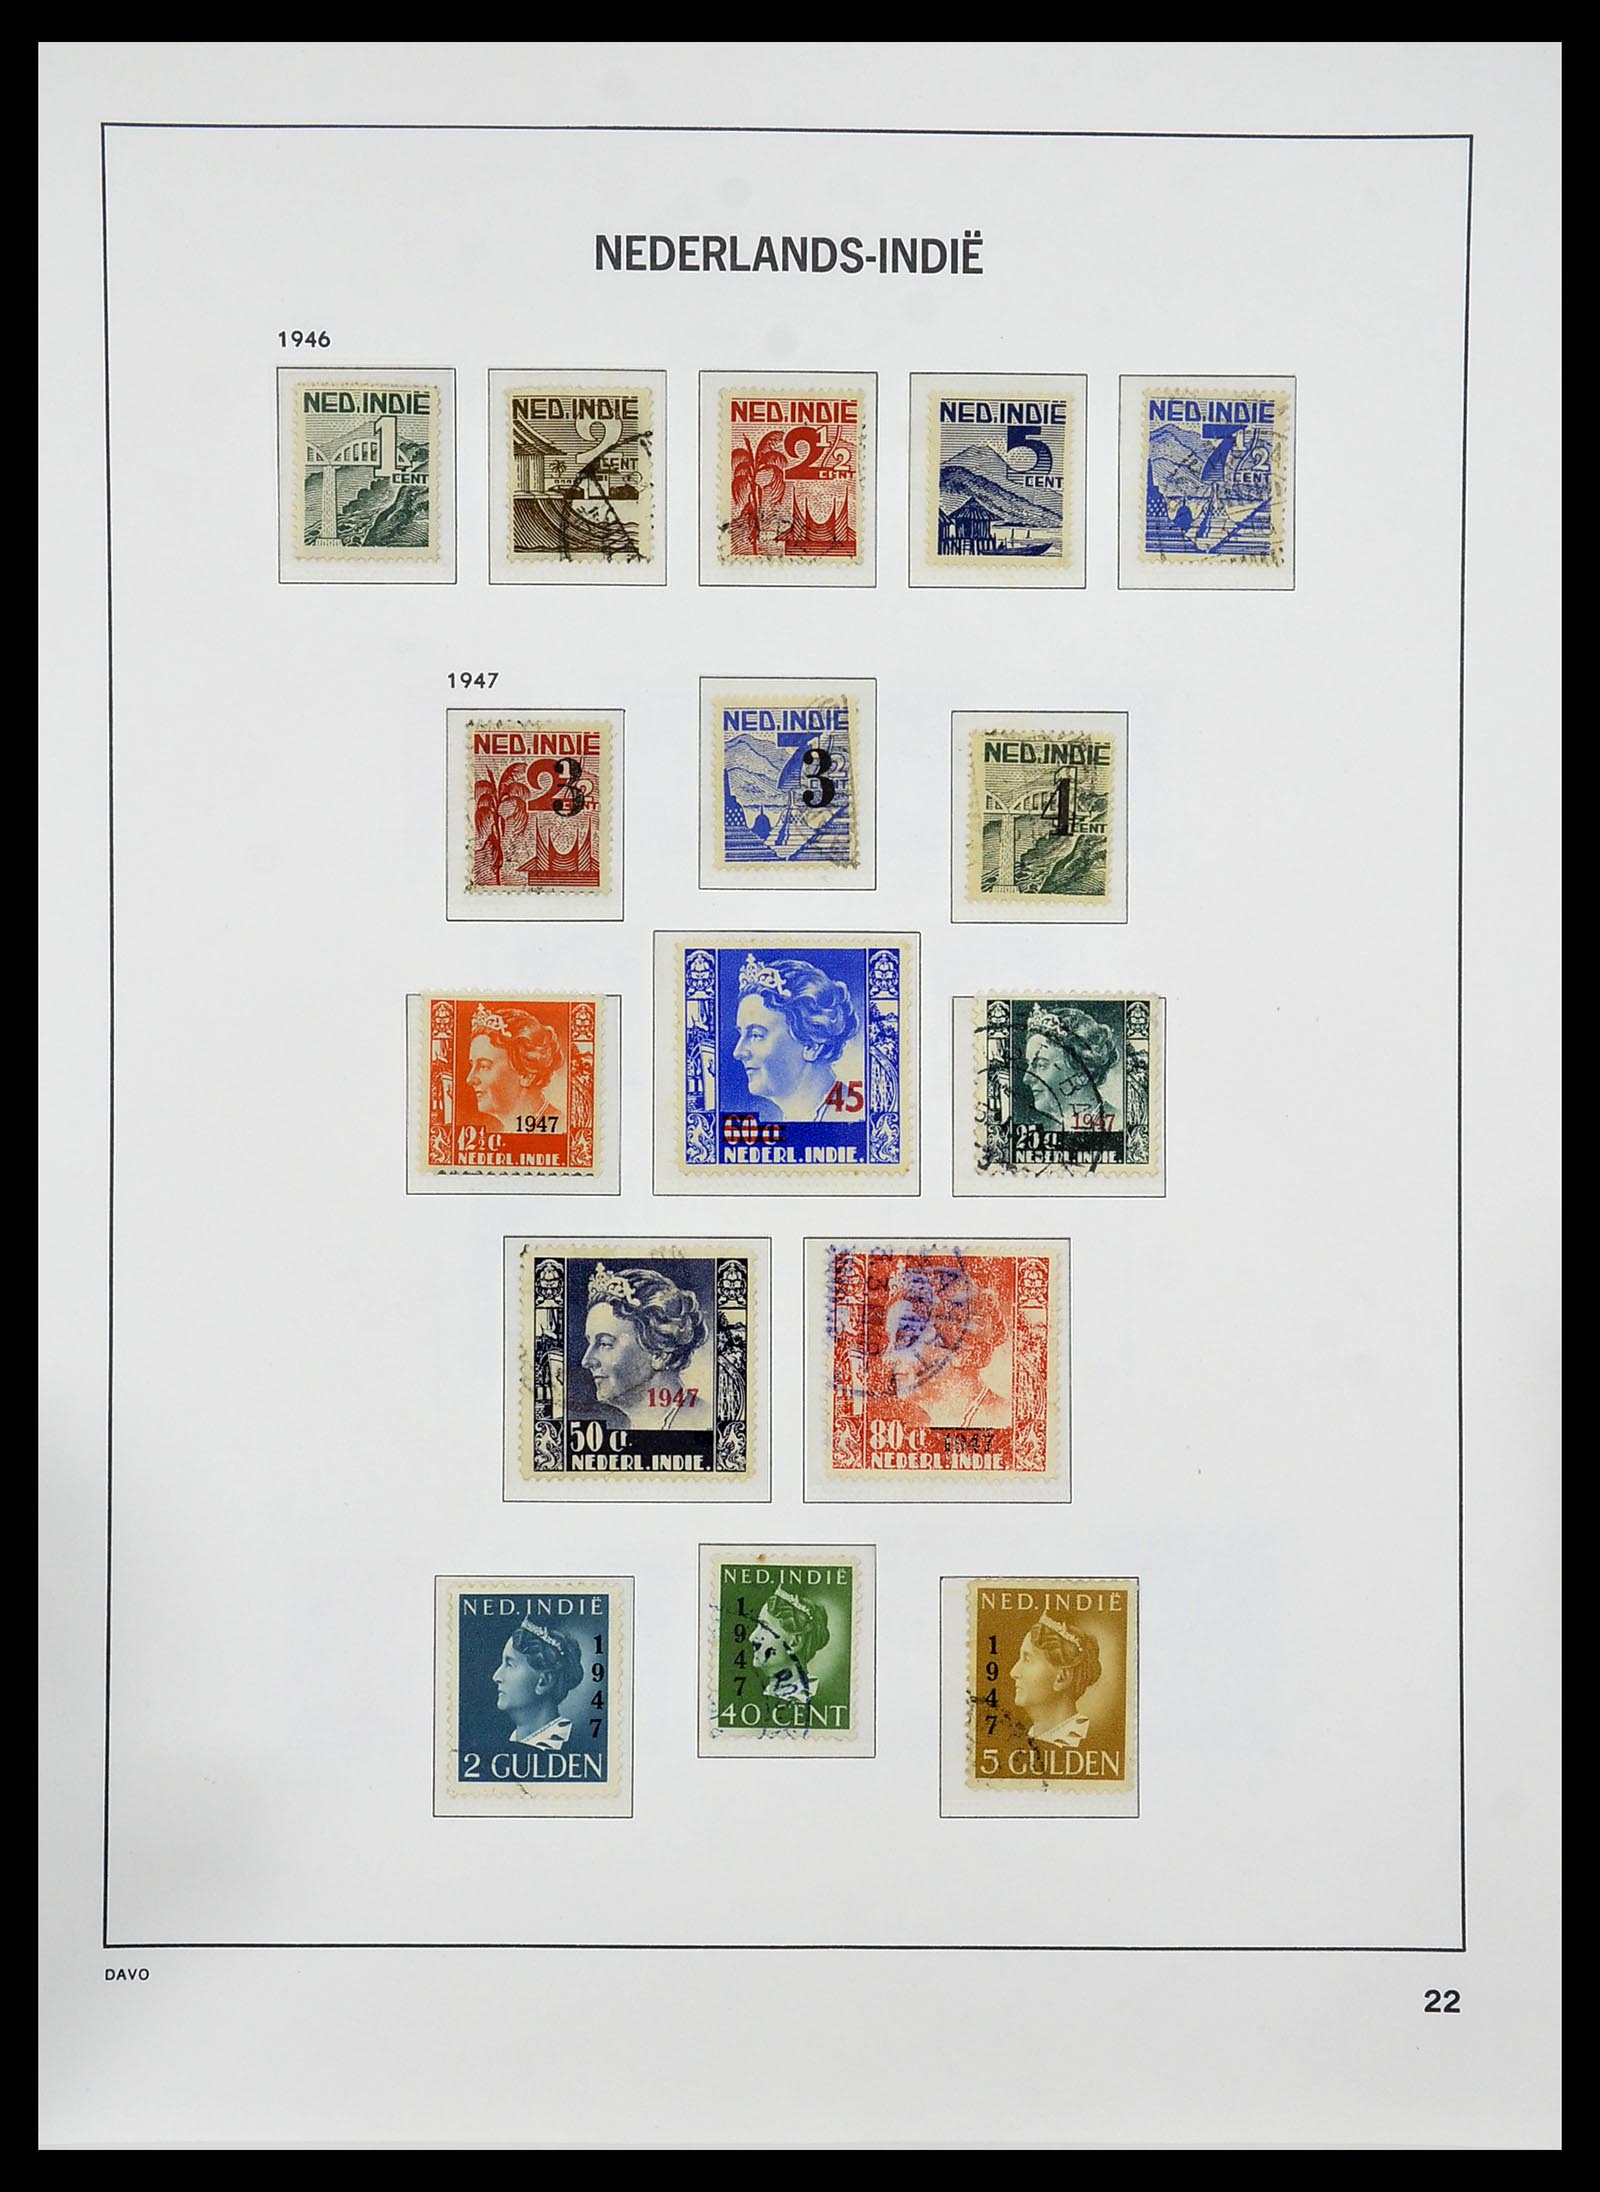 34284 021 - Stamp collection 34284 Dutch territories 1864-1985.